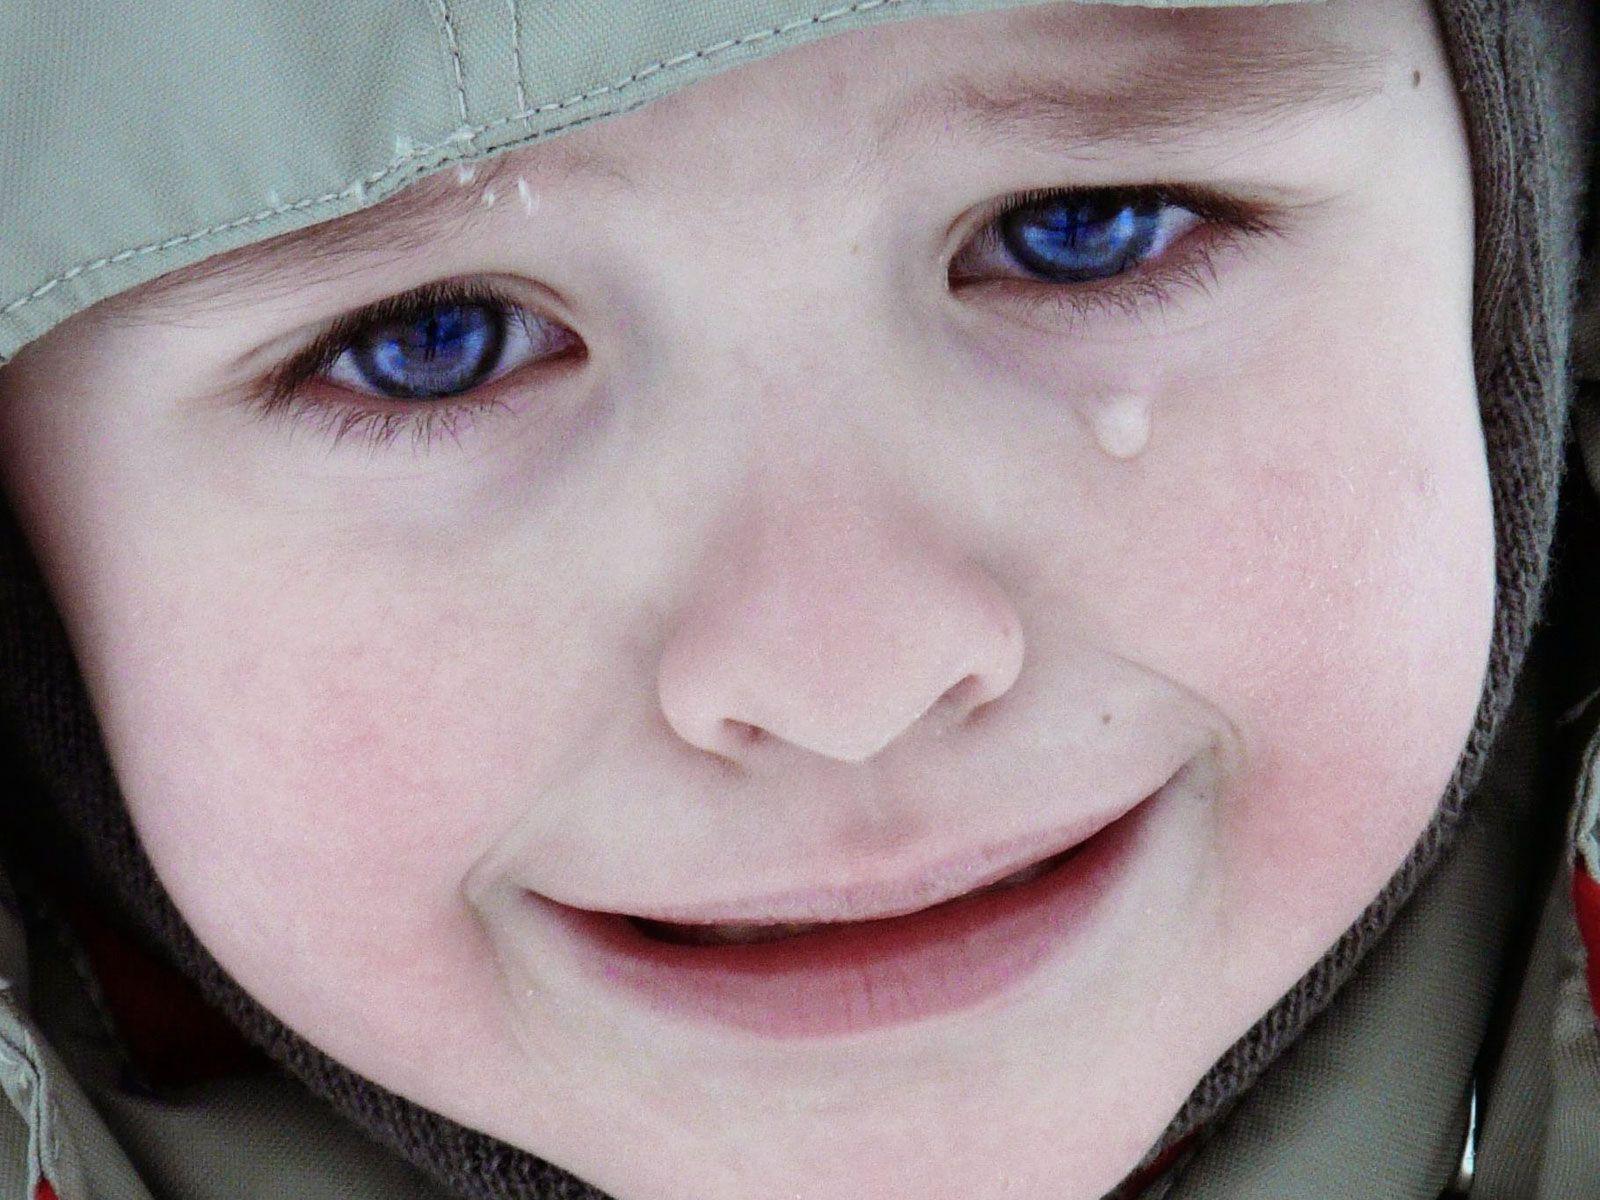 crying baby image and wallpaper Download